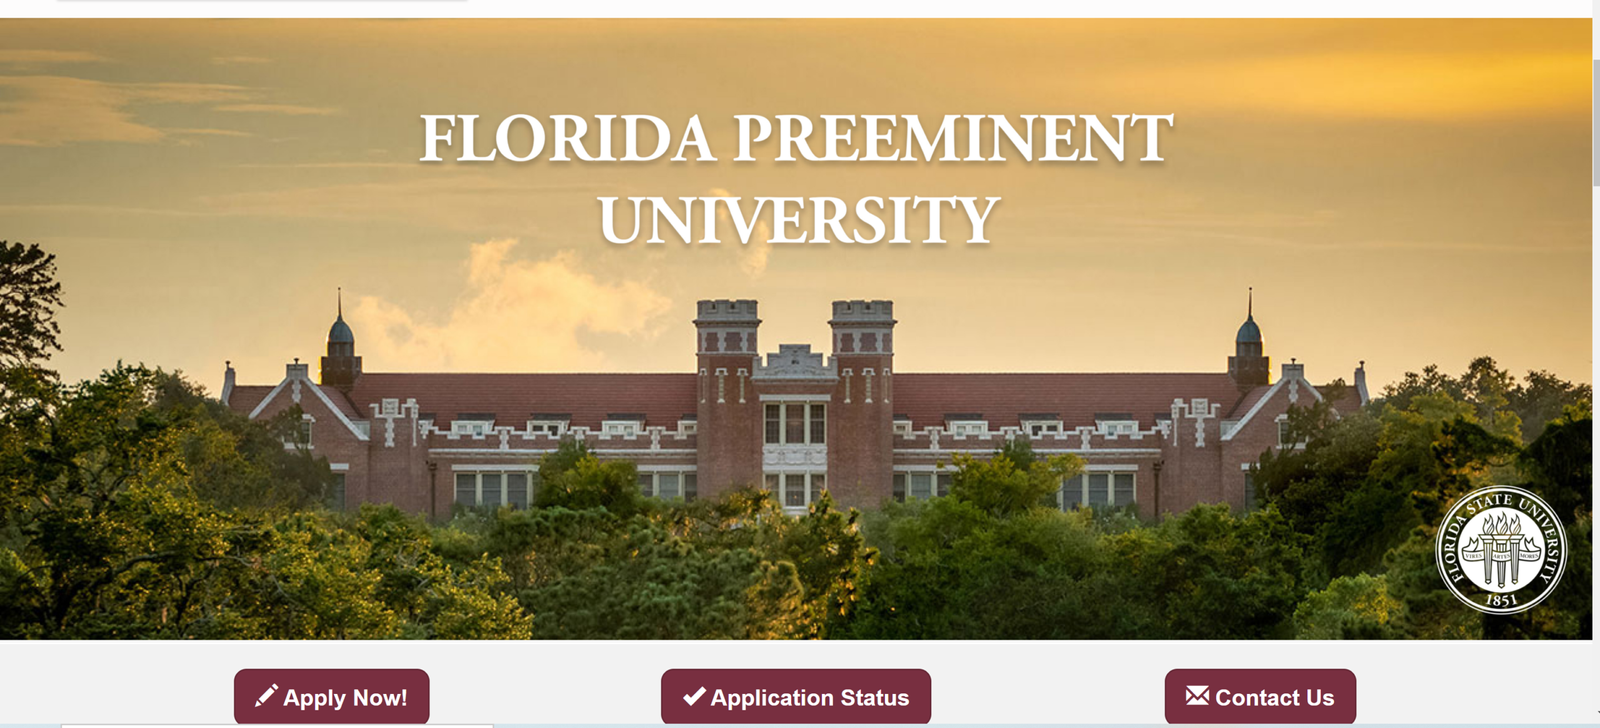 Florida State University (FSU) – Acceptance Rate, GPA, and Requirements